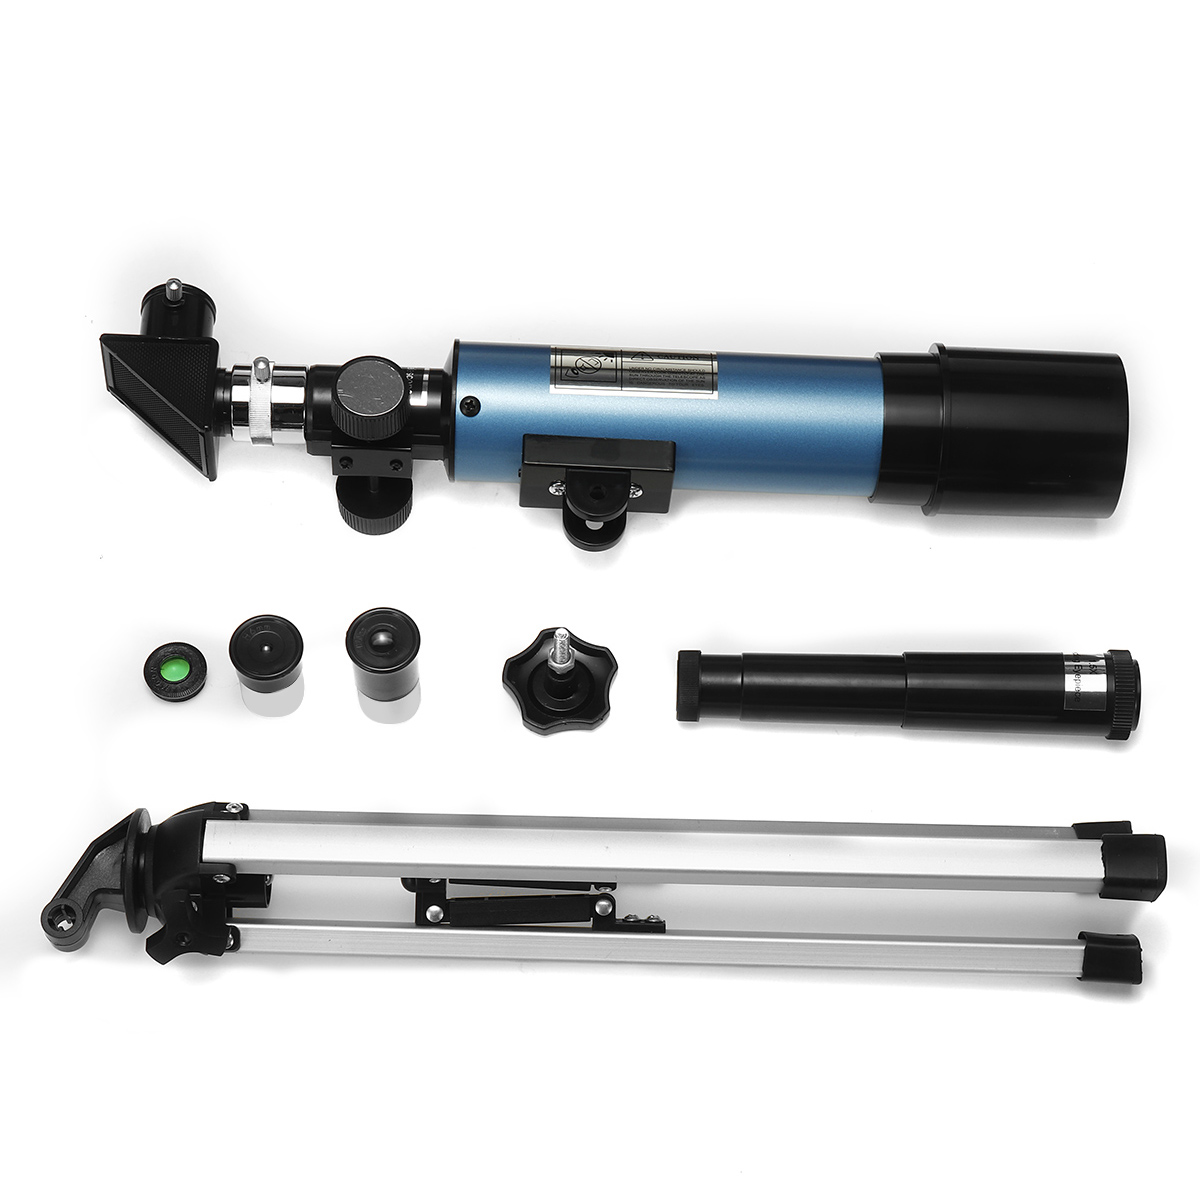 Find 90x Magnification Astronomical Telescope Clear Image with Remote Control and Camera Rod for Observe Astronomy for Sale on Gipsybee.com with cryptocurrencies